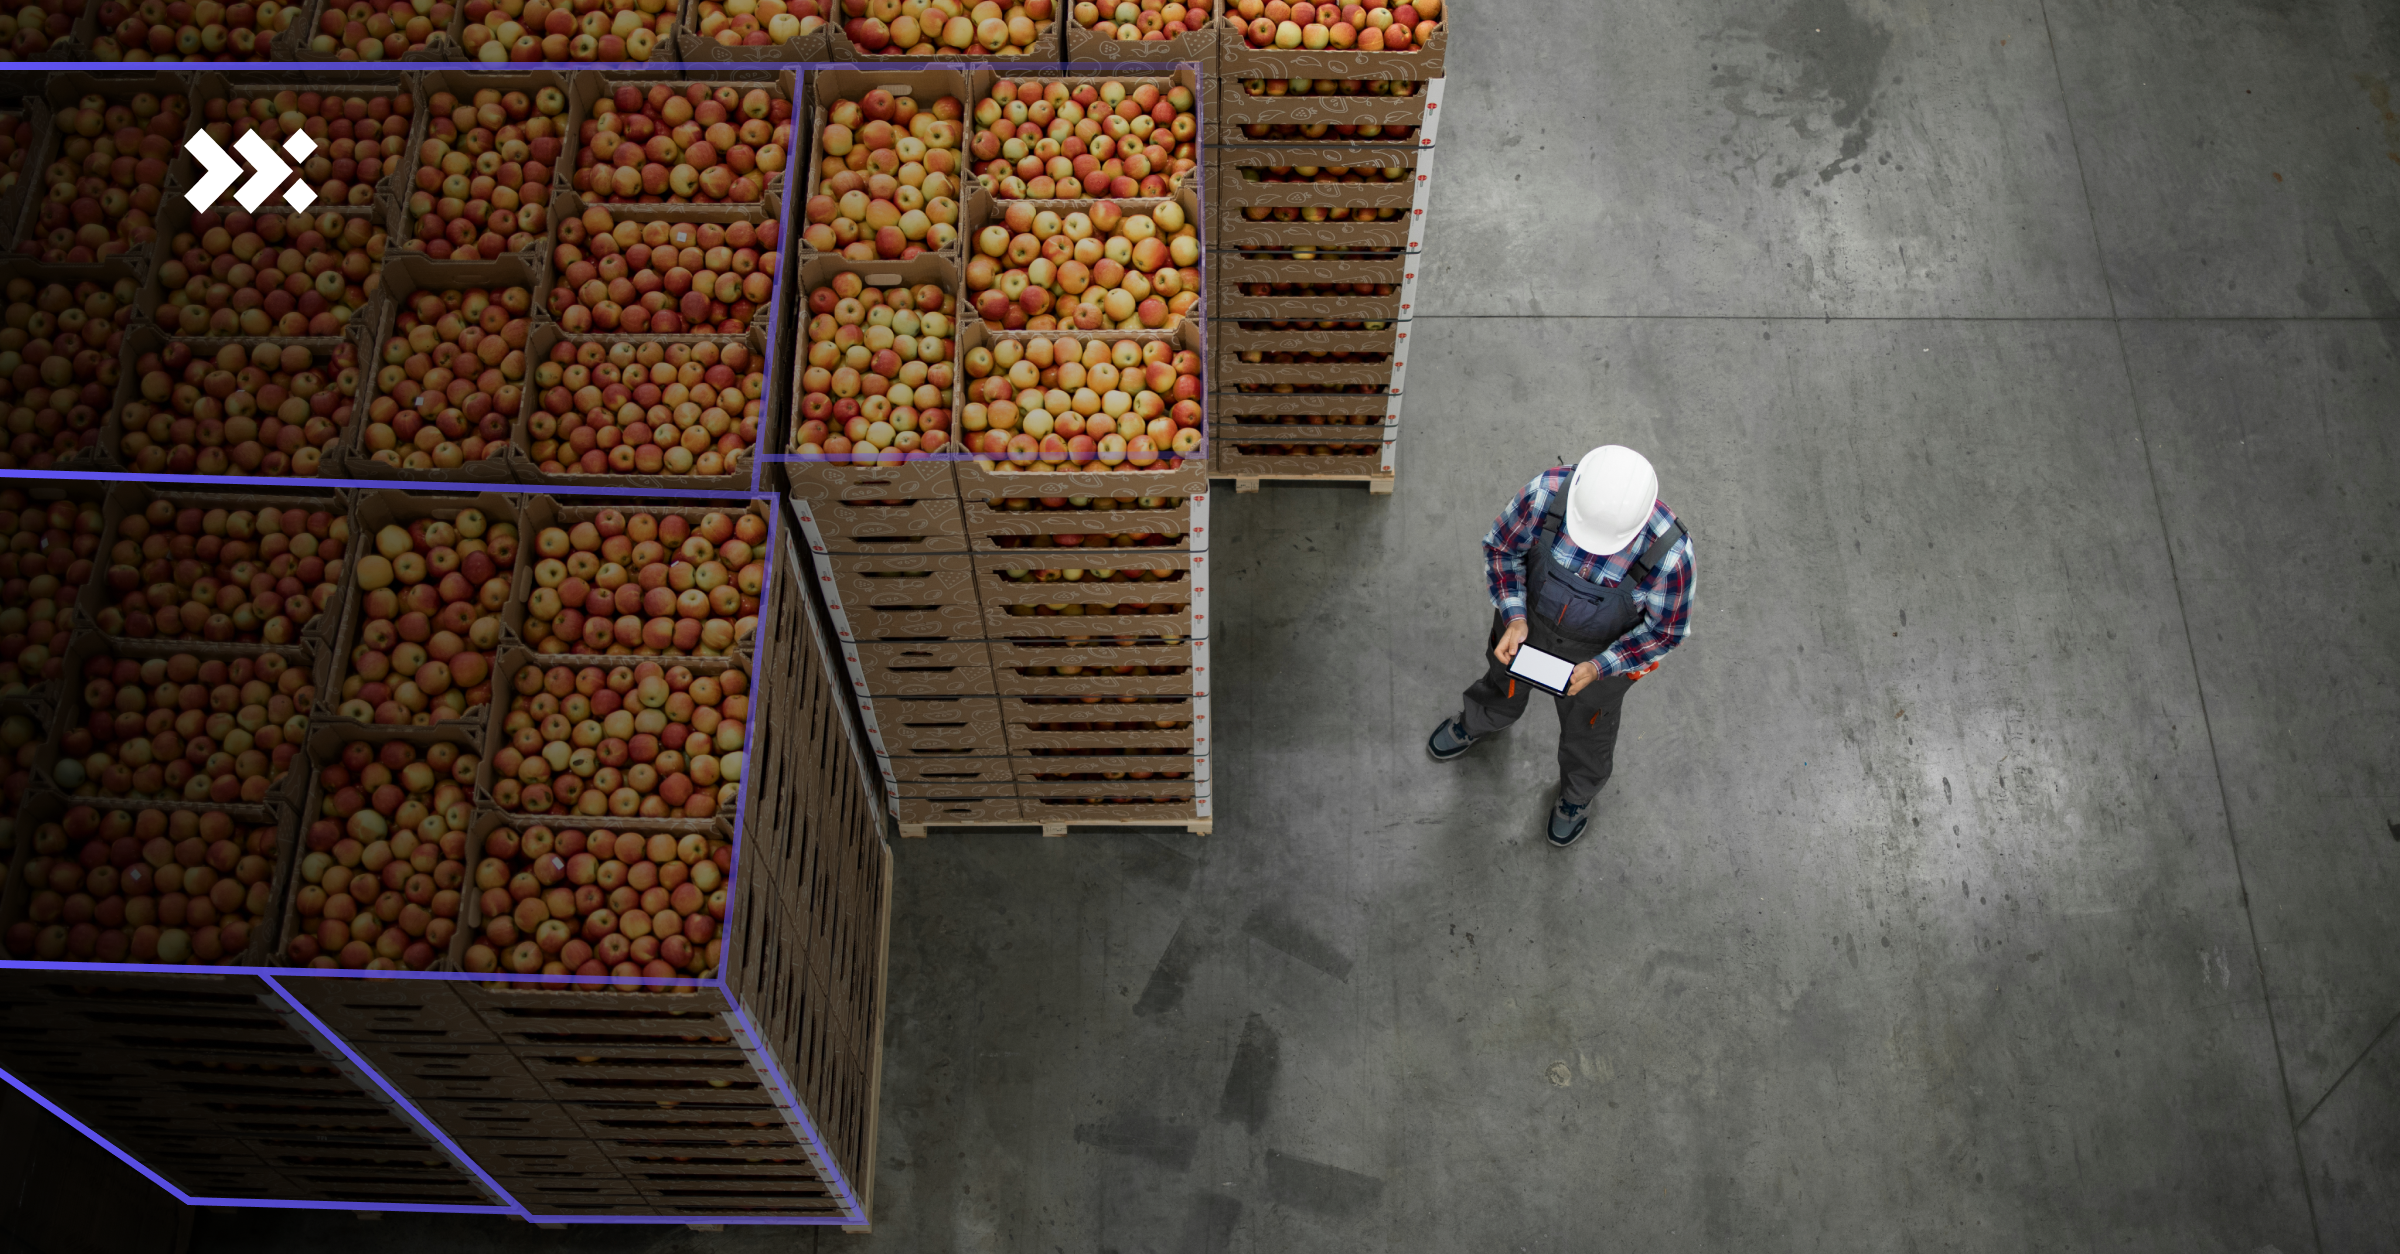 TradeTech ensures Safety, Security and Quality in Perishable Goods Transportation